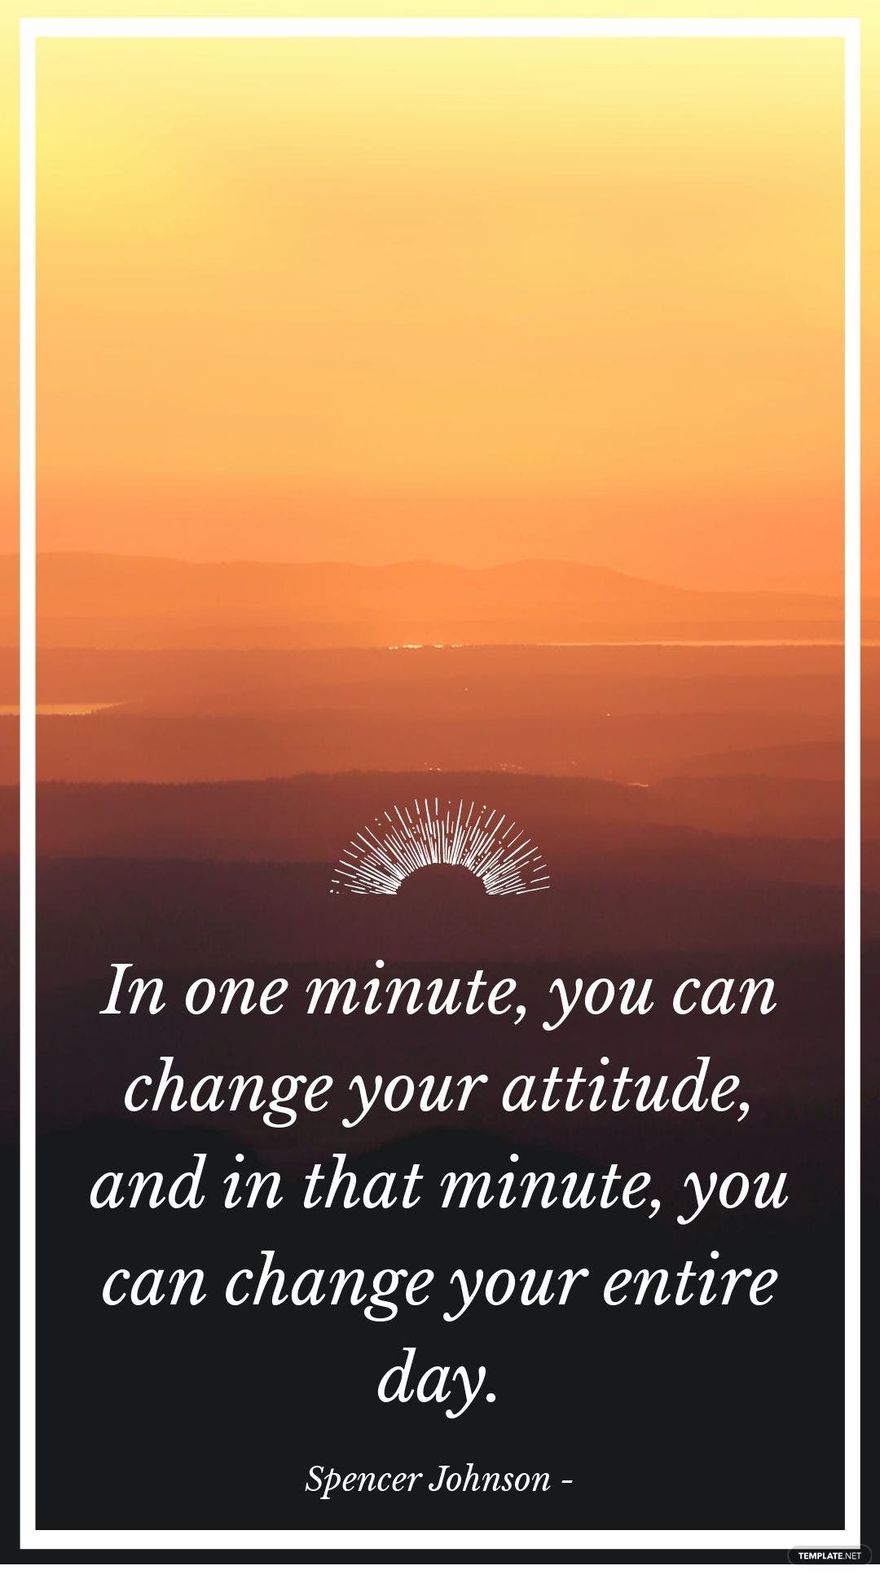 Spencer Johnson - In one minute, you can change your attitude, and in that minute, you can change your entire day.